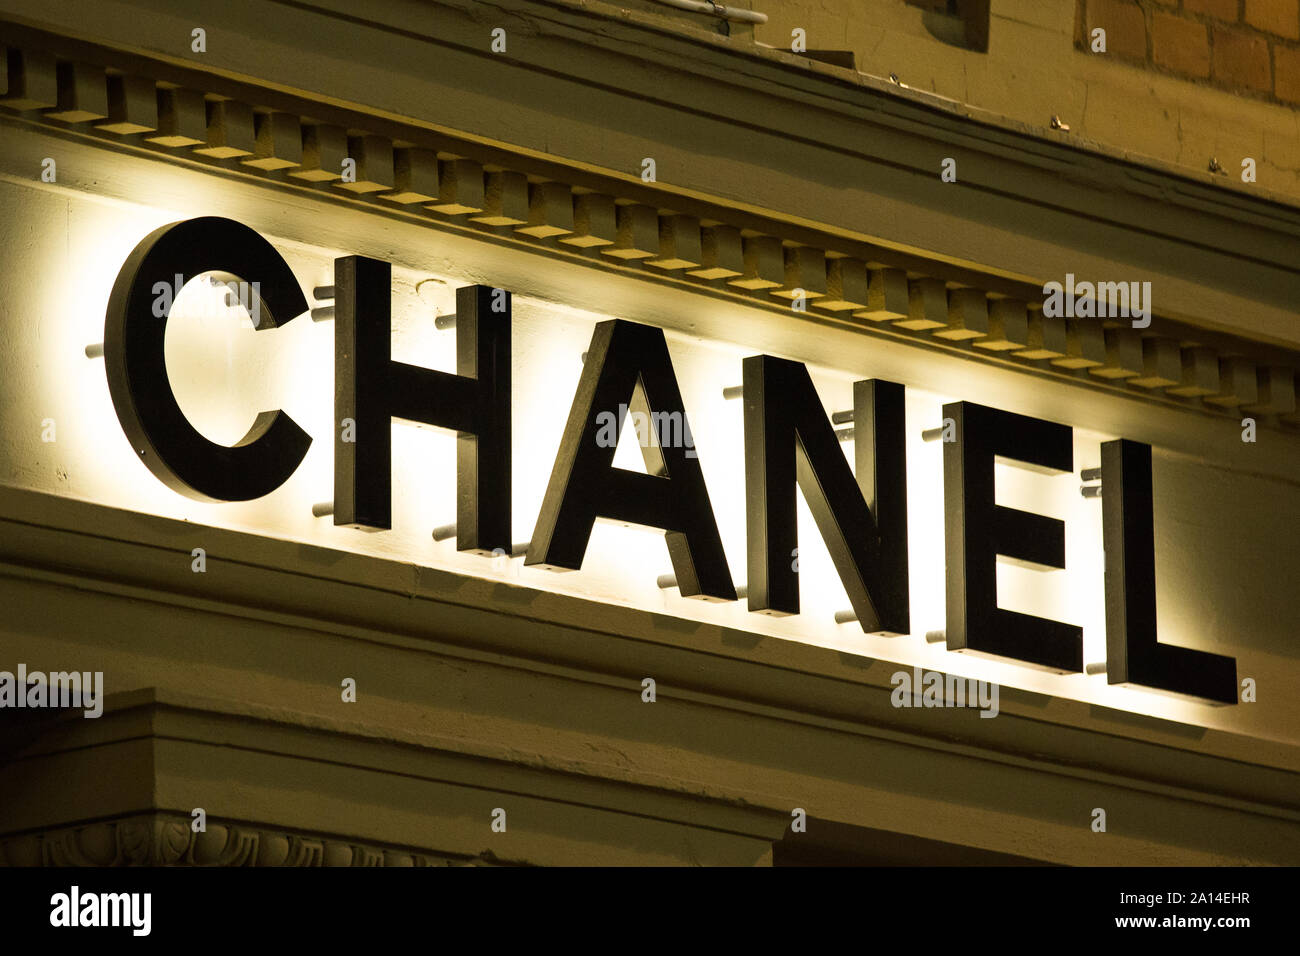 CHANEL logo seen in Gothenburg.Chanel S.A. is a high fashion house that specialises in haute couture, ready-to-wear clothes, luxury goods  and fashion accessories. Stock Photo